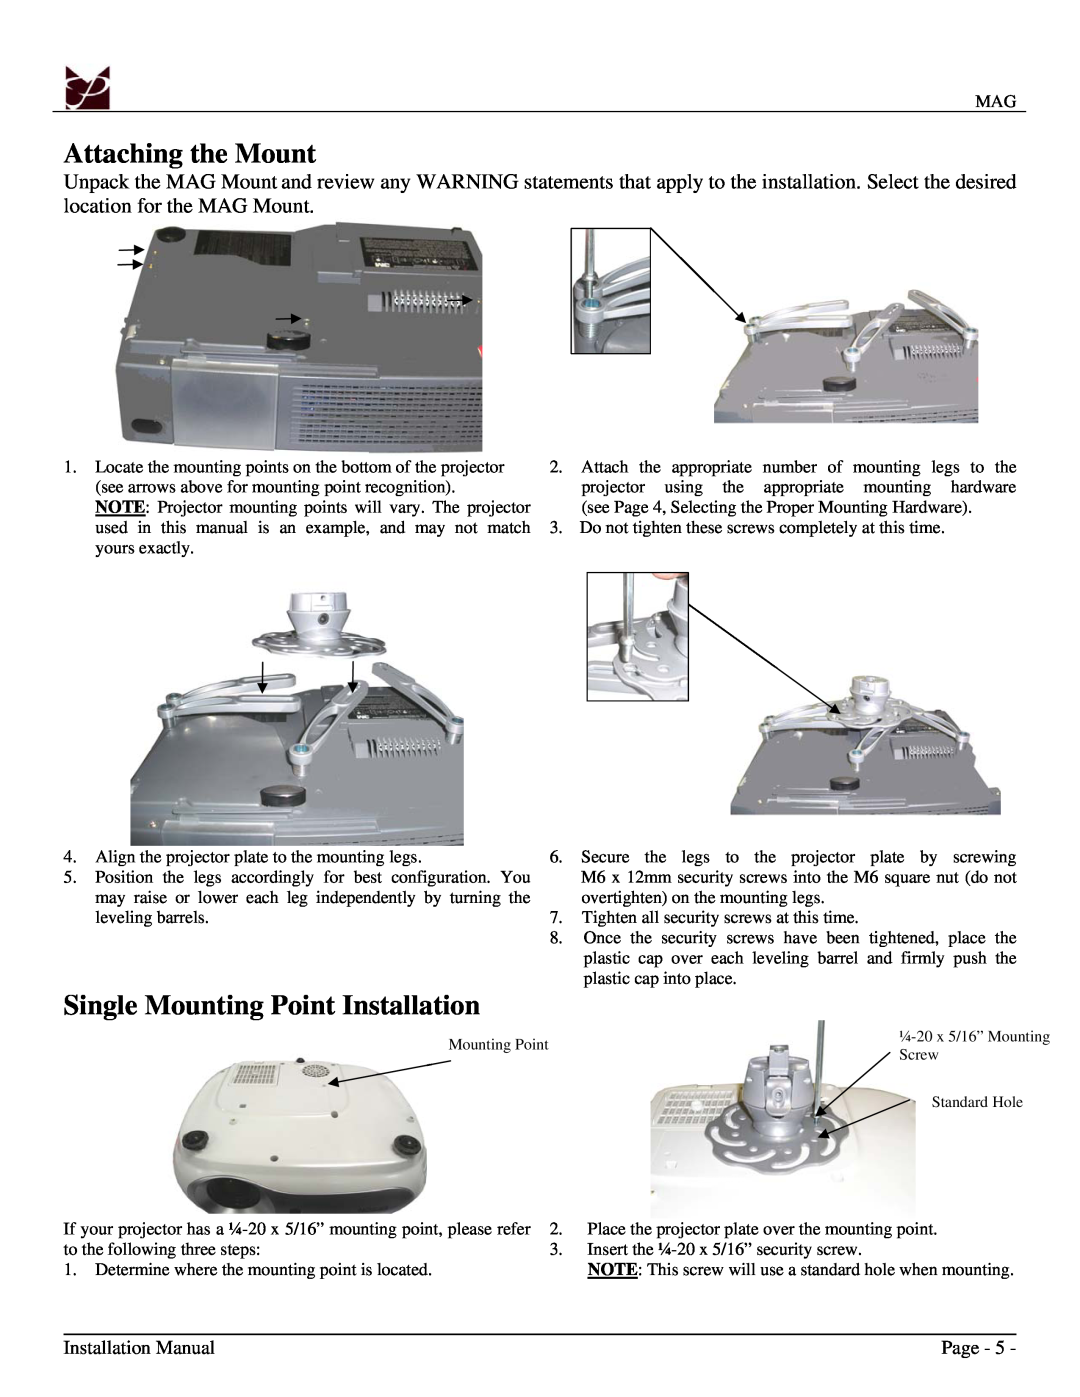 Premier Mounts MAG installation manual Attaching the Mount, Single Mounting Point Installation, Installation Manual, Page 